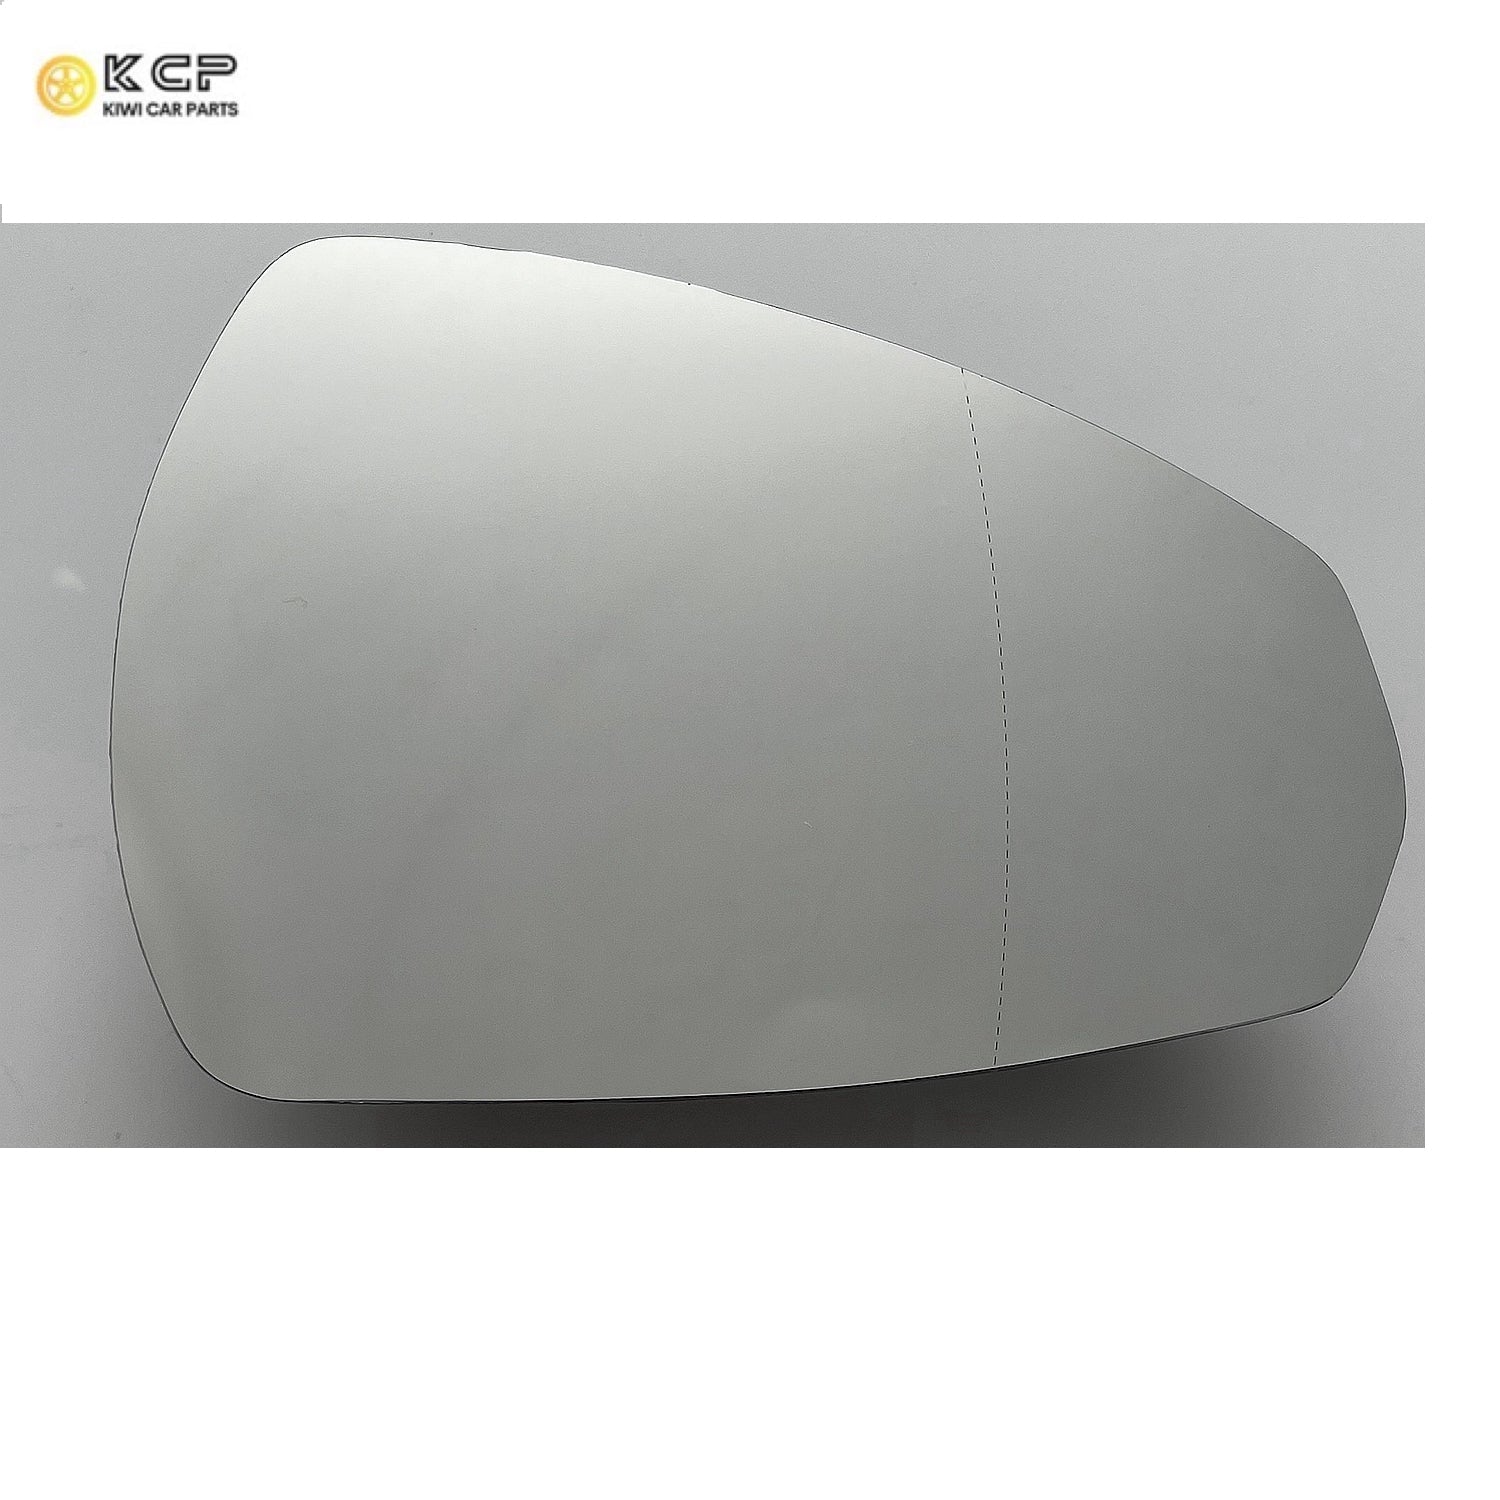 RIGHT Side Wide angle heated car mirror glass for AUDI A3 2012 13 14 15 16 17 18 19